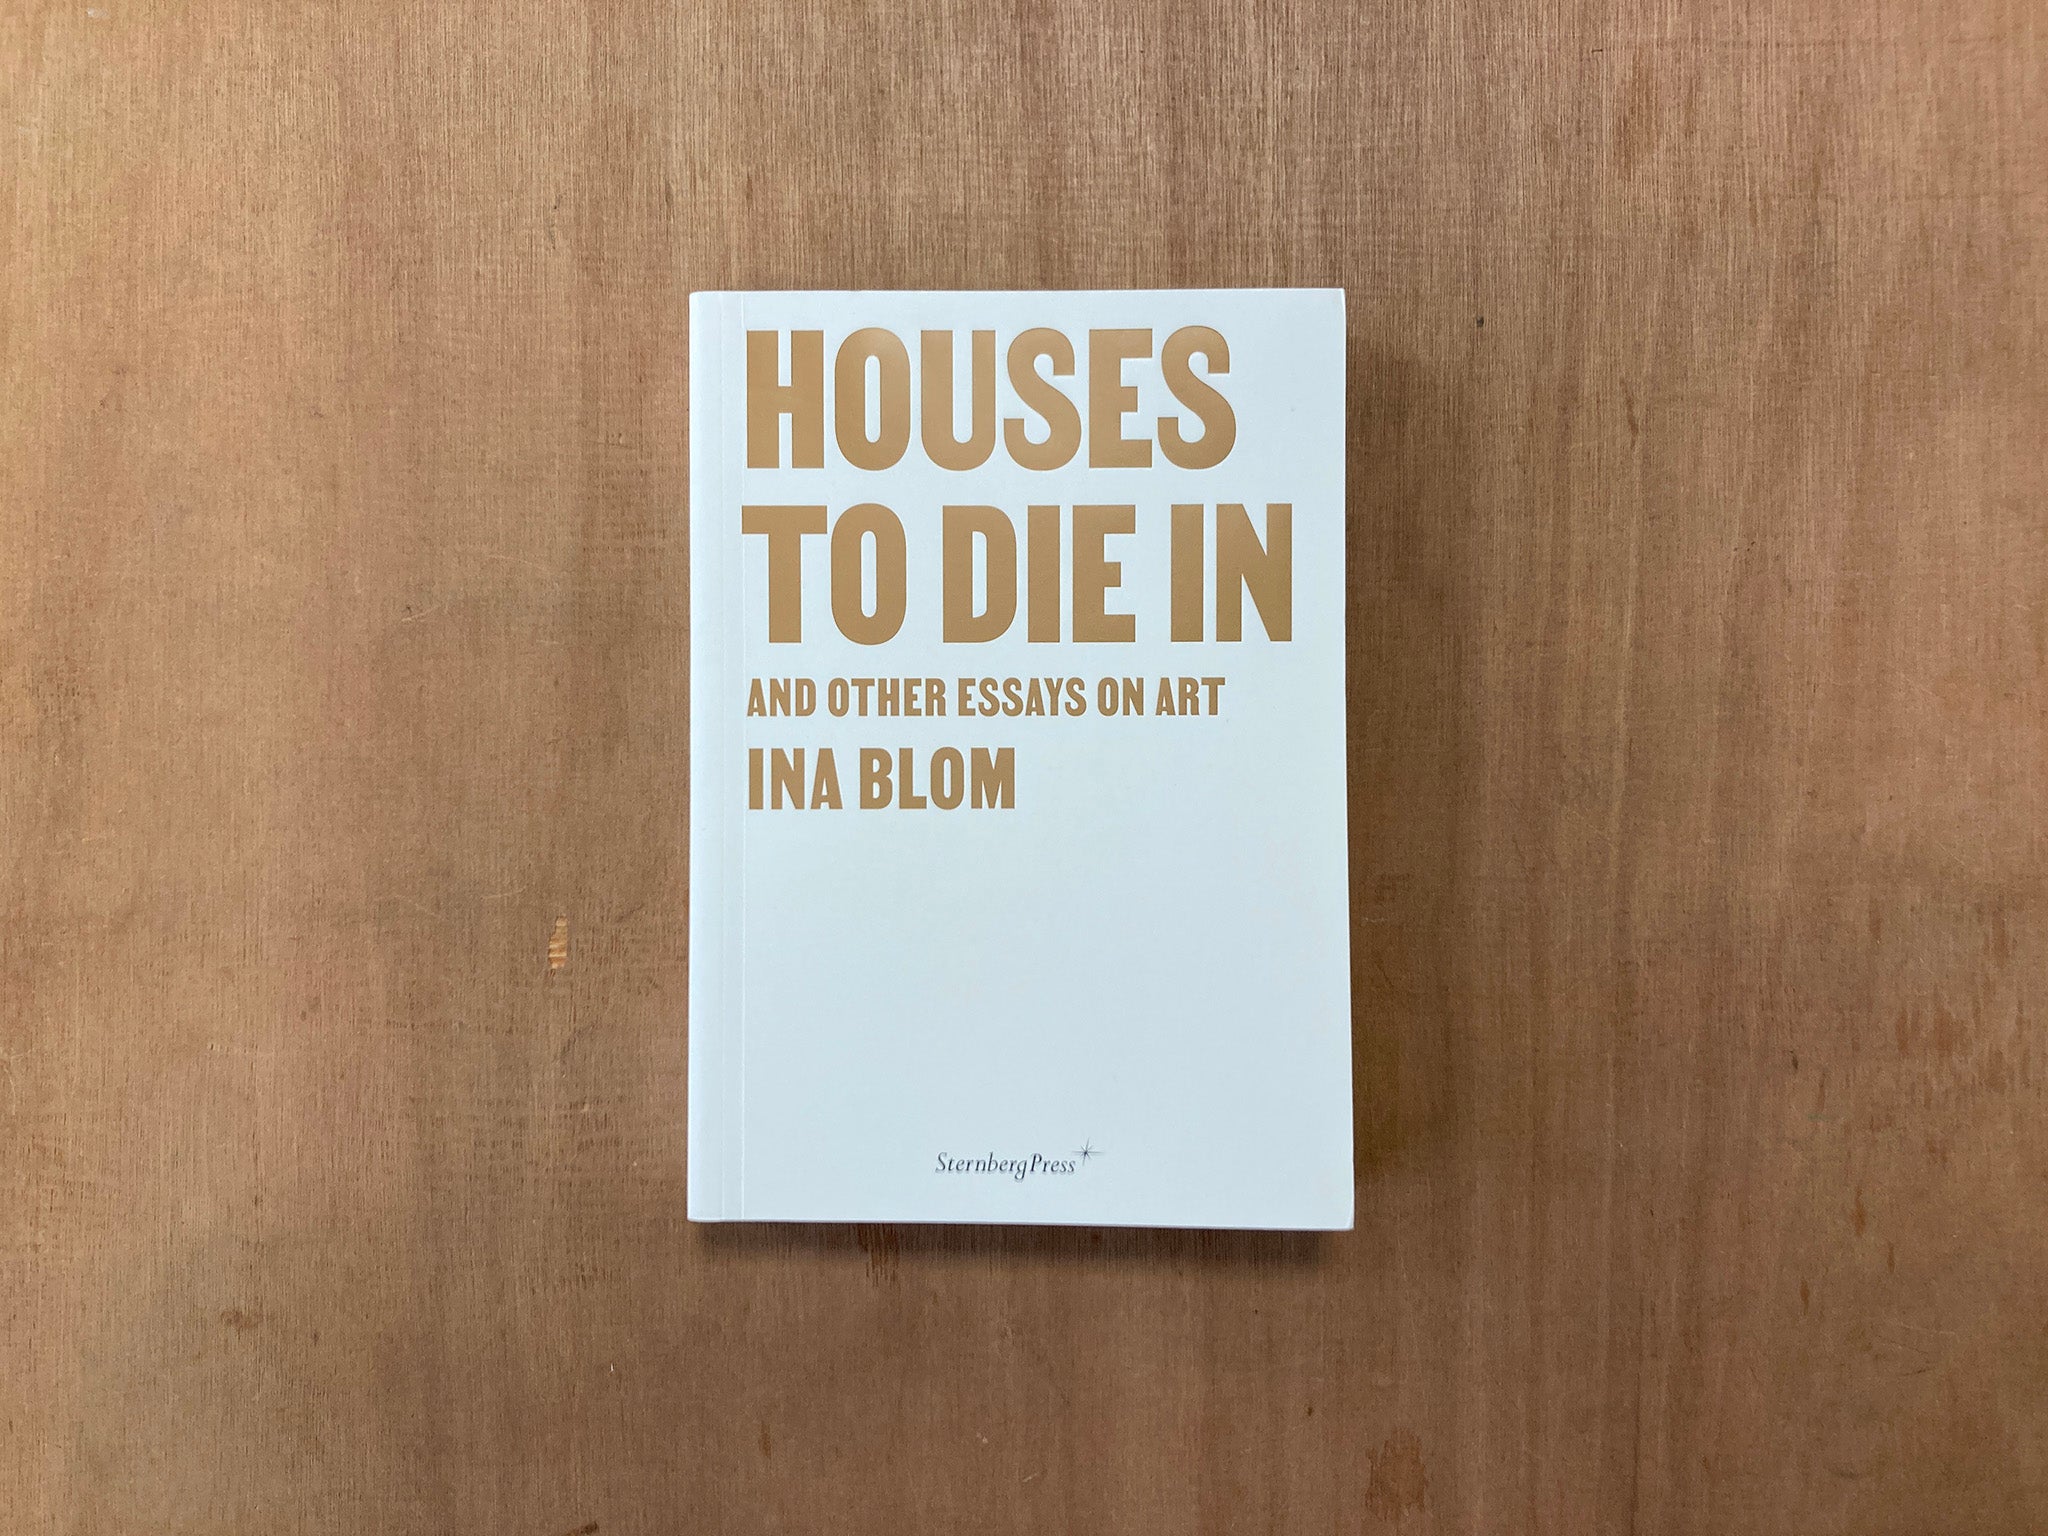 HOUSES TO DIE IN / AND OTHER ESSAYS ON ART by Ina Blom